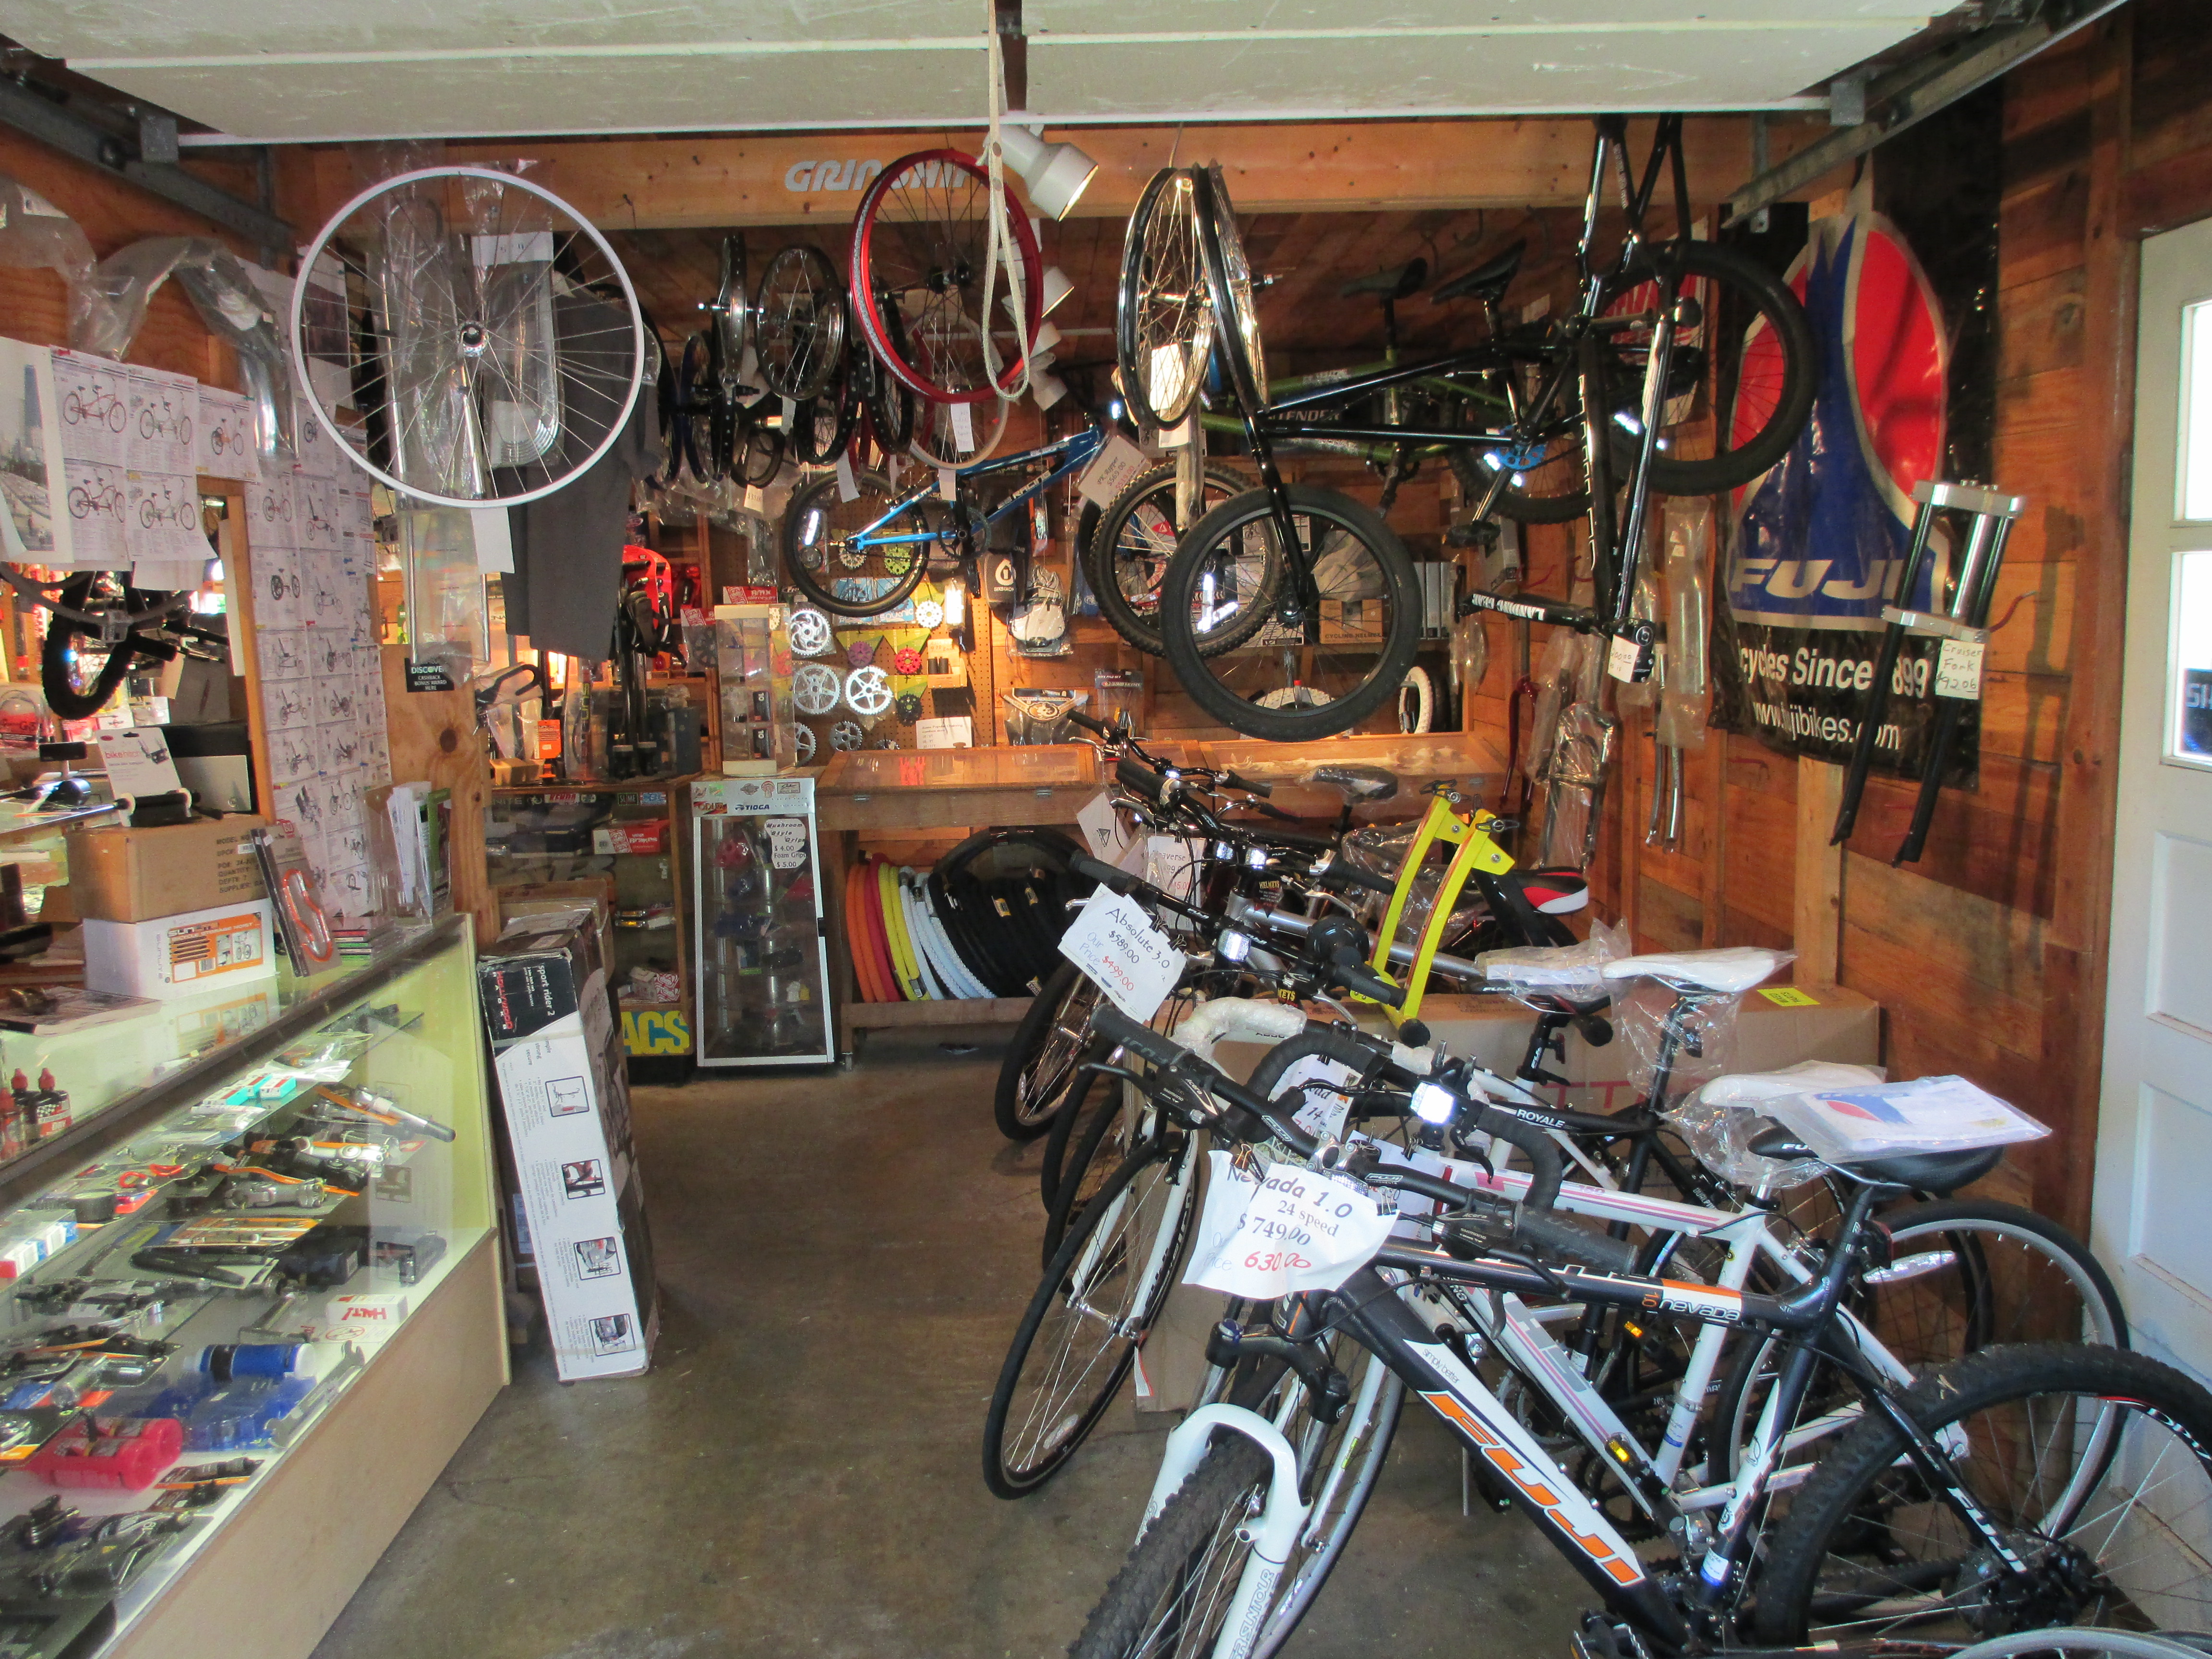 used bike parts for sale near me